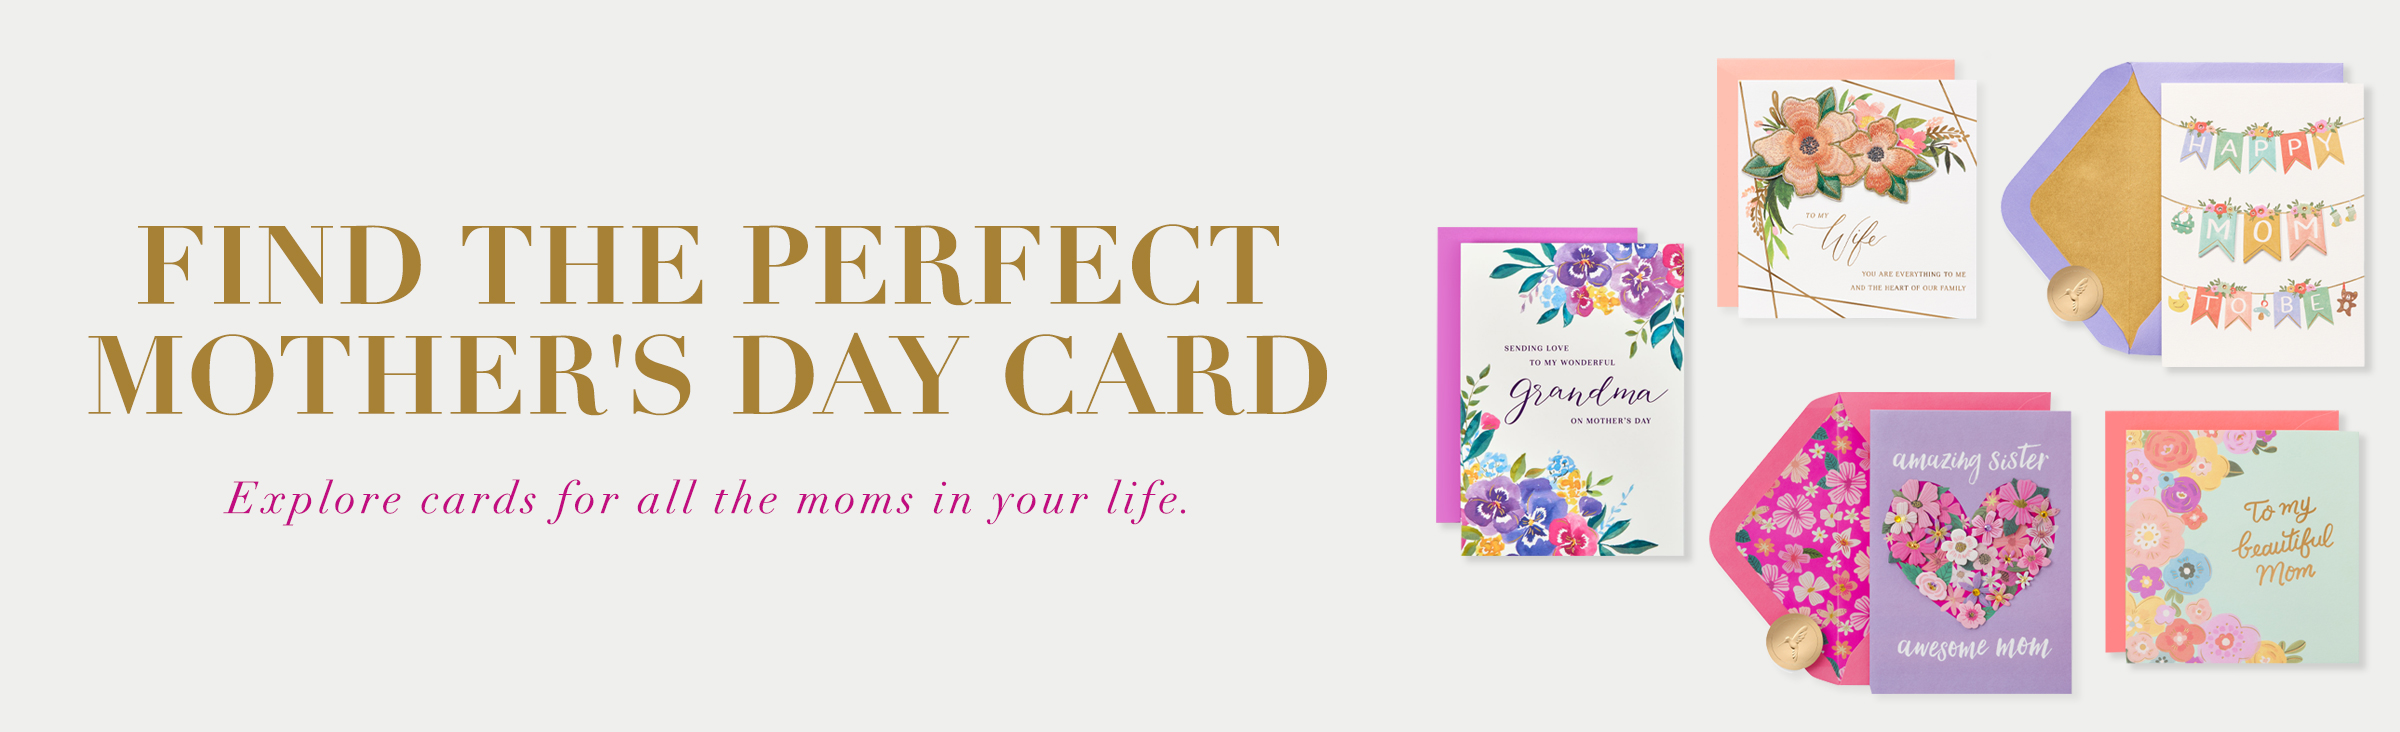 Find the perfect Mother's Day card Explore cards for all the moms in your life.